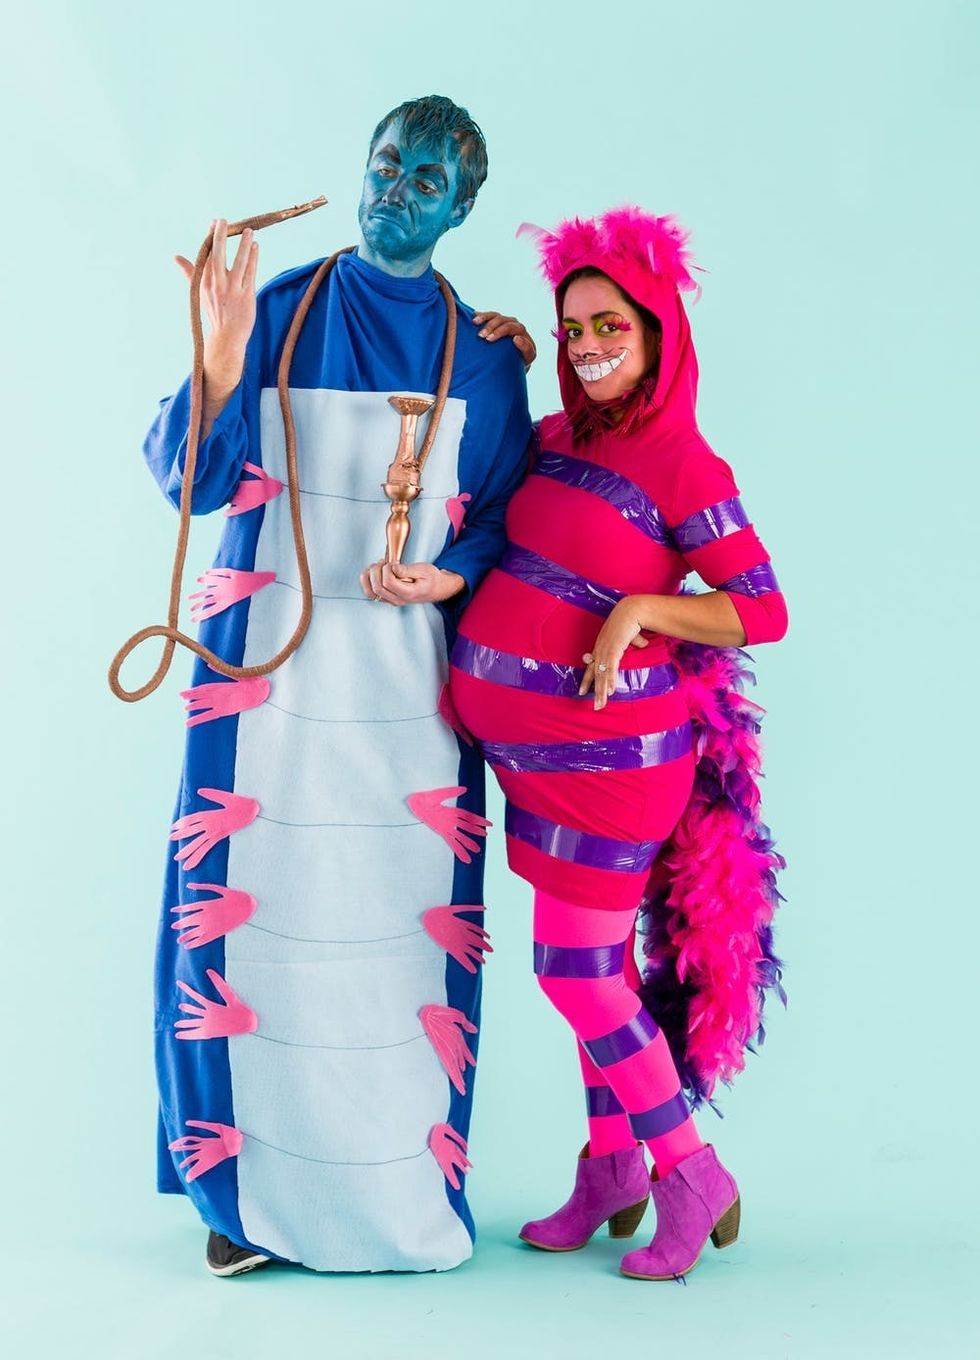 Caterpillar and Cheshire Cat from Alice in Wonderland couples Halloween costume idea